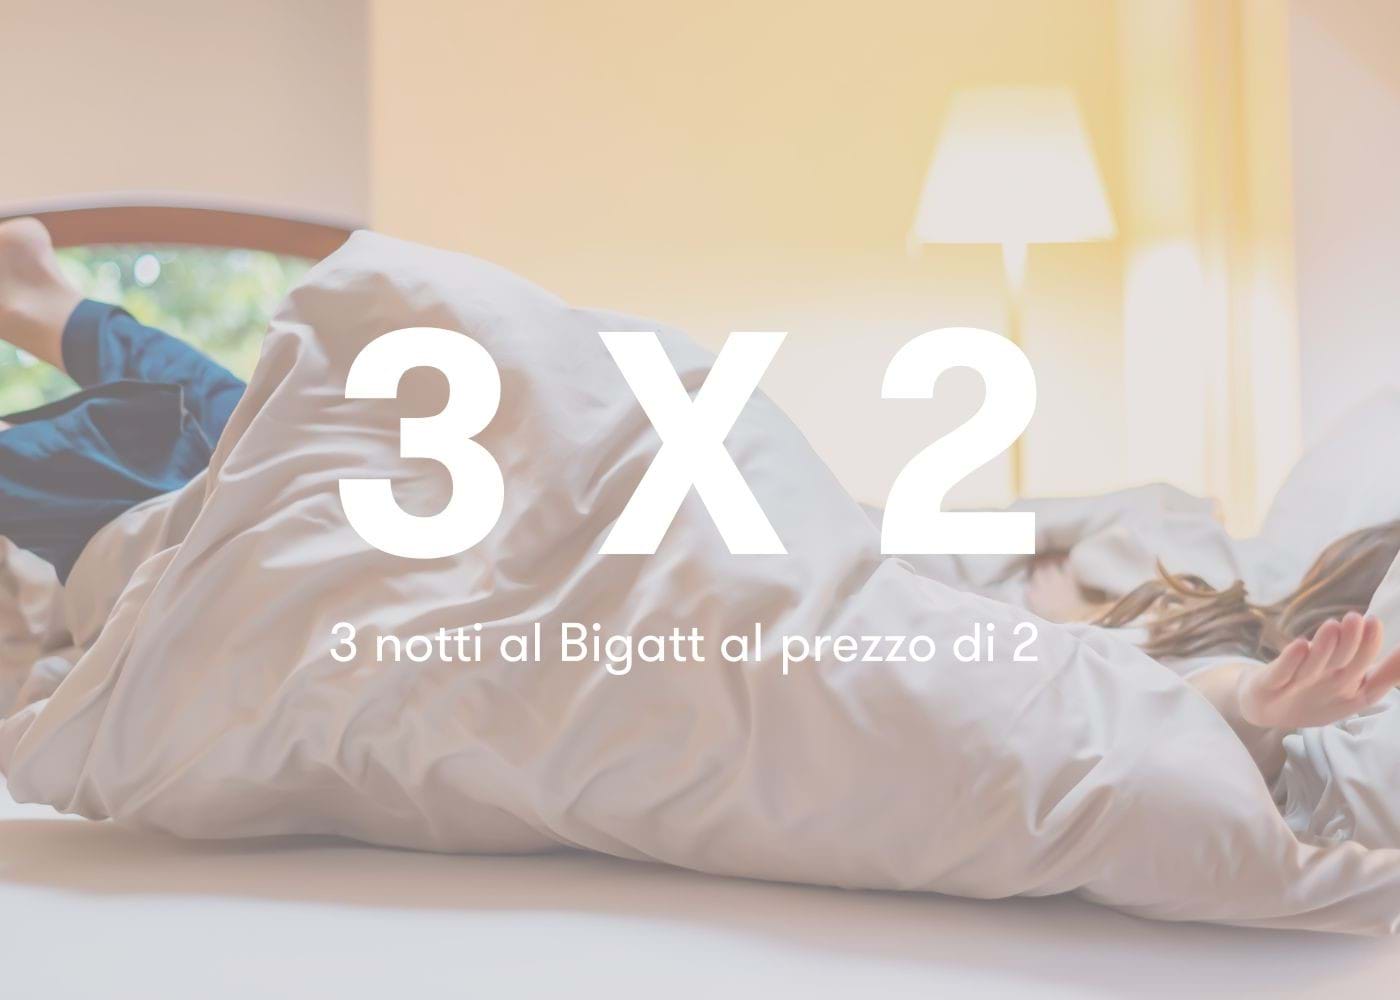 3 NIGHTS AT THE BIGATT FOR THE PRICE OF 2